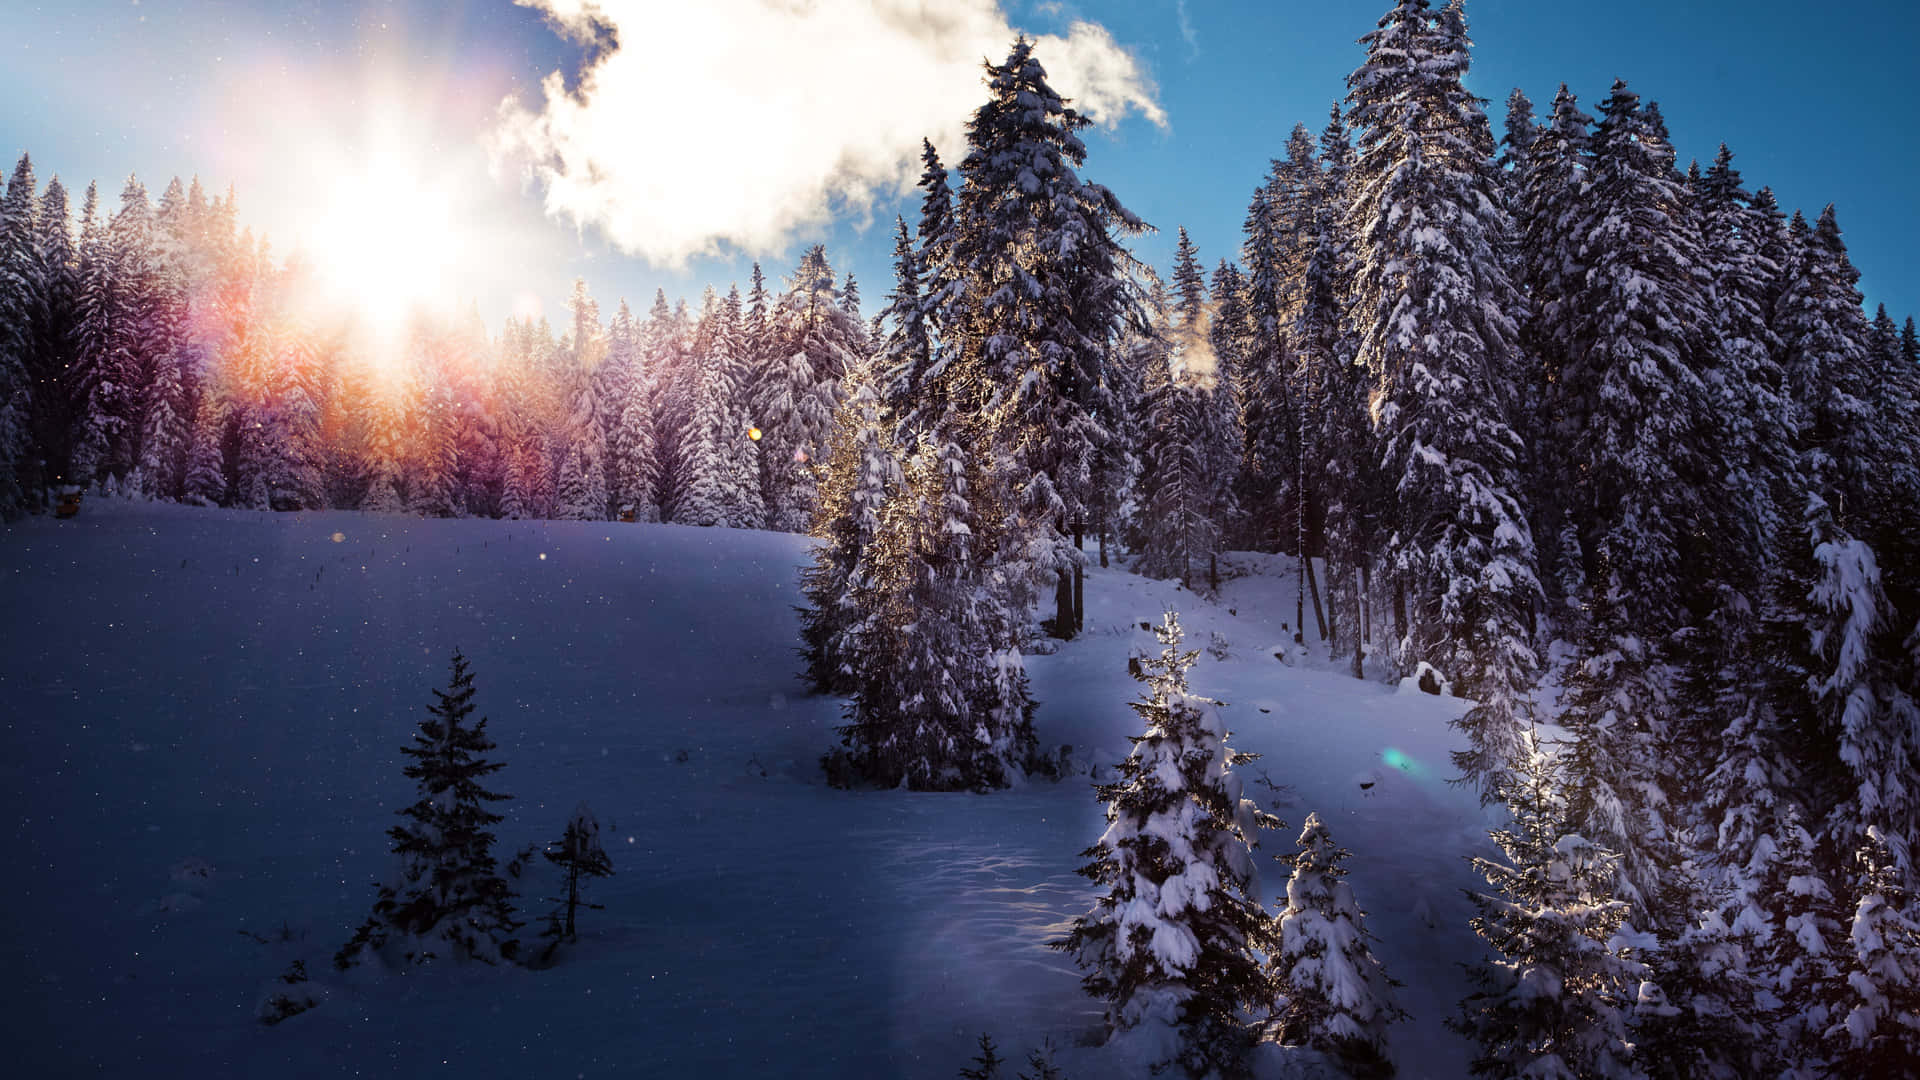 A Winter Wonderland - Enjoy the Snow-Covered View Wallpaper